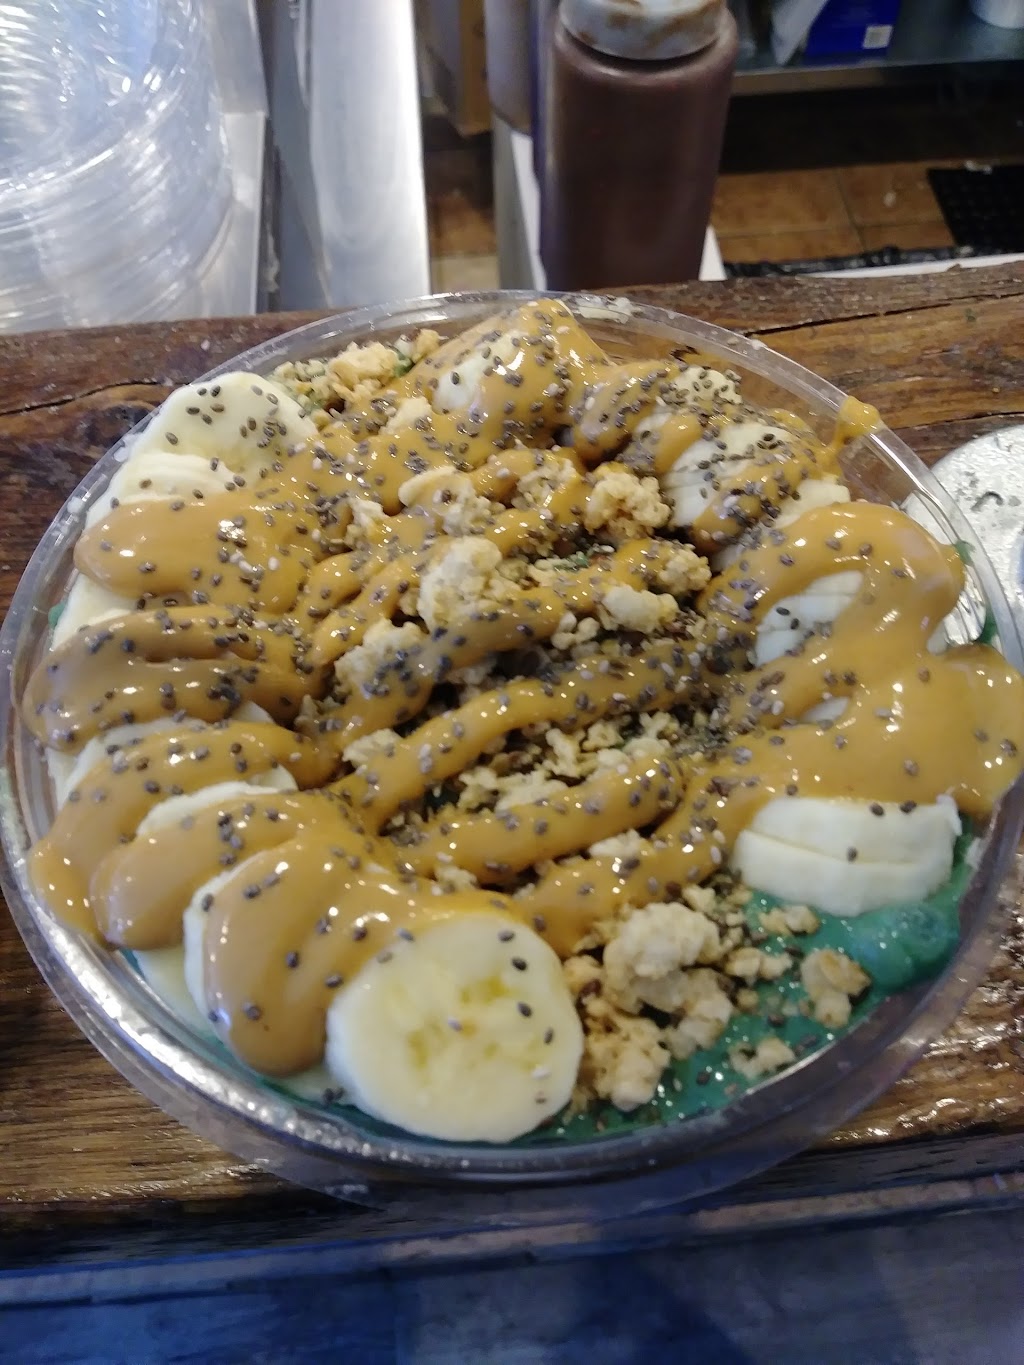 Playa Bowls | 44 Manchester Ave Ste M, Forked River, NJ 08731 | Phone: (609) 994-2828